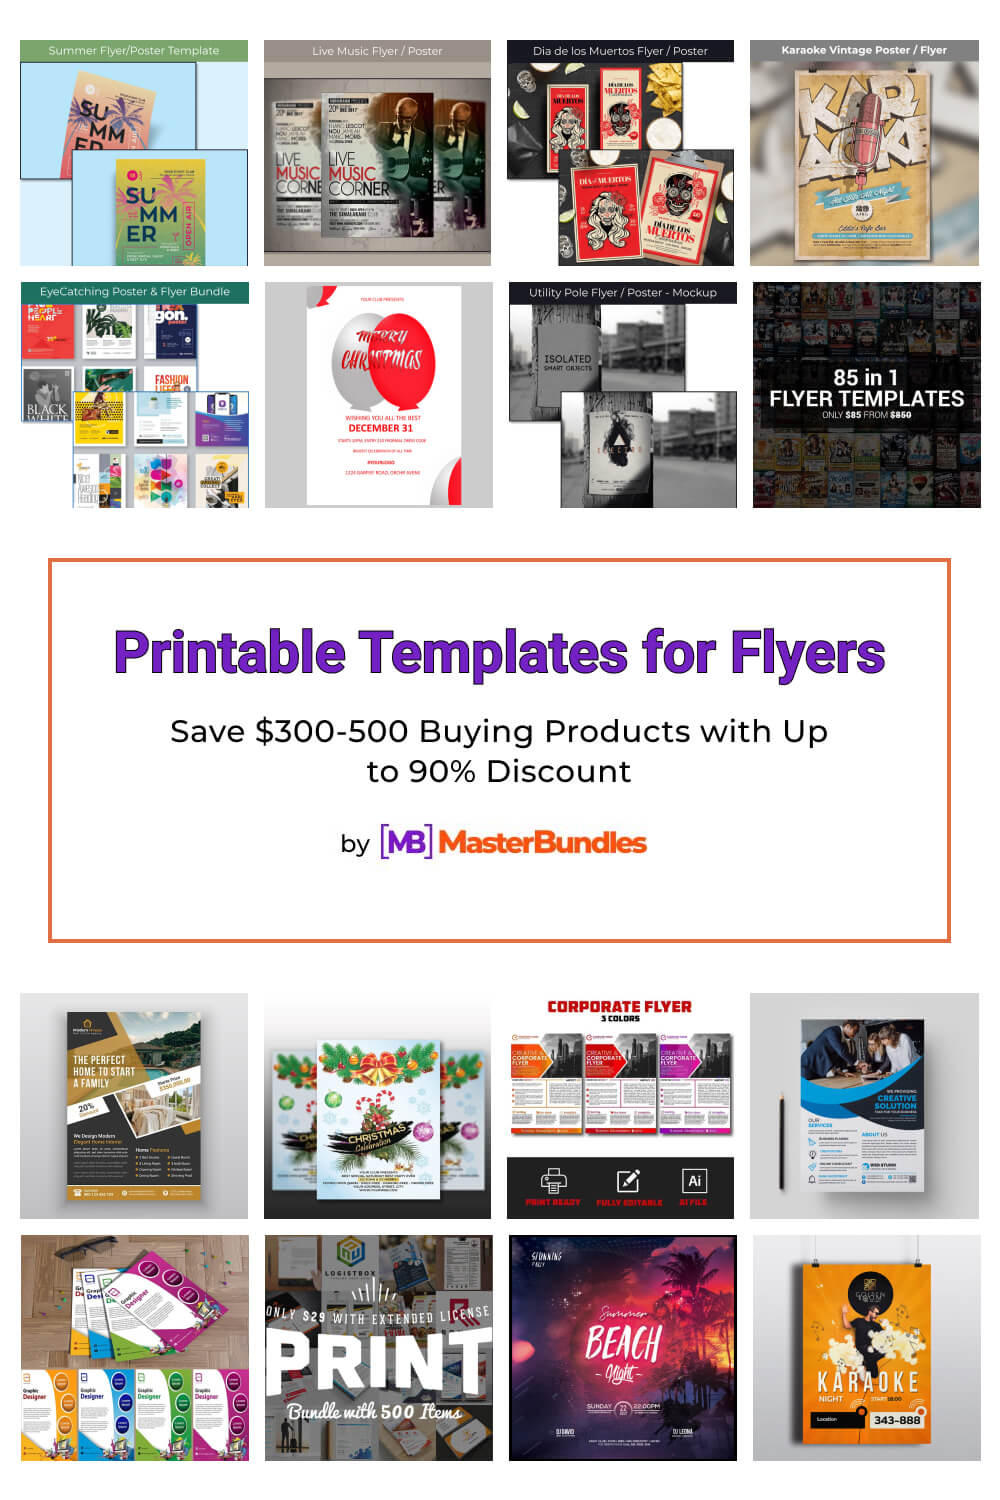 printable templates for flyers pinterest image.